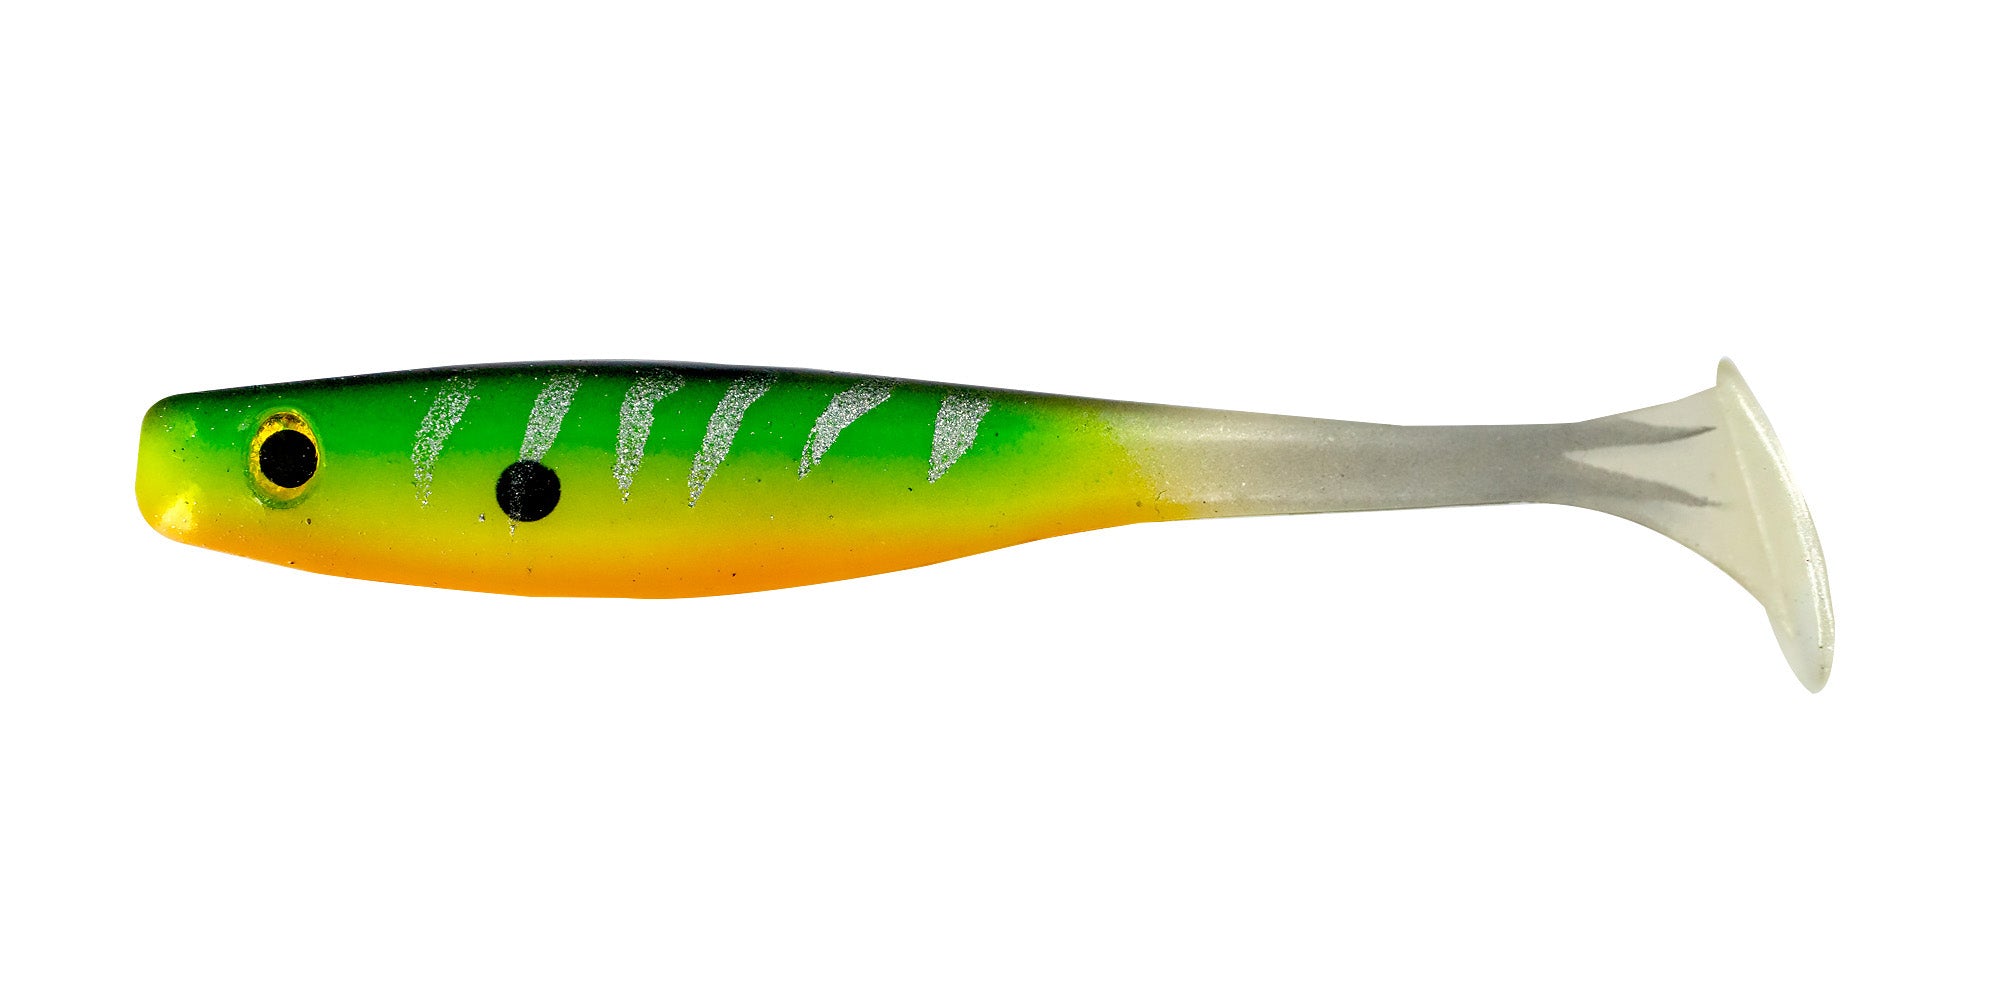 Big Bite Baits Fishing Lures - A 3.5 Suicide Shad will fit in the